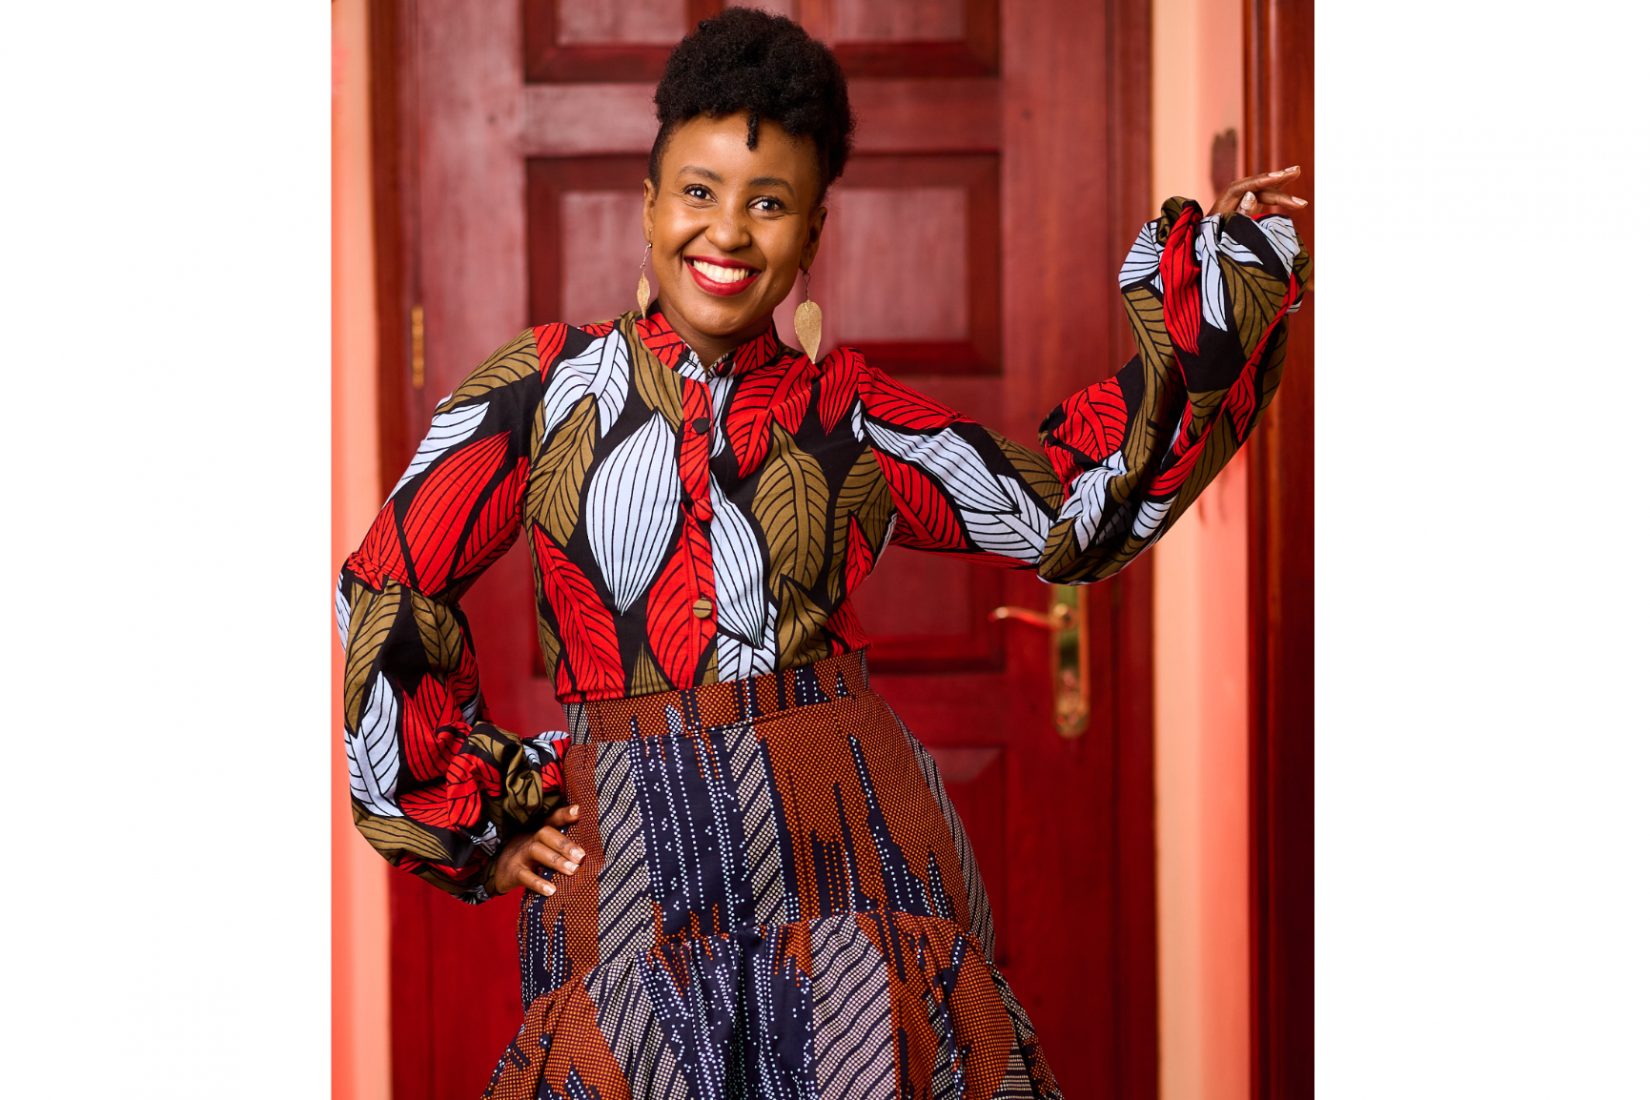 Woman smiling, wearing patterned shirt and skirt standing in front of a door.